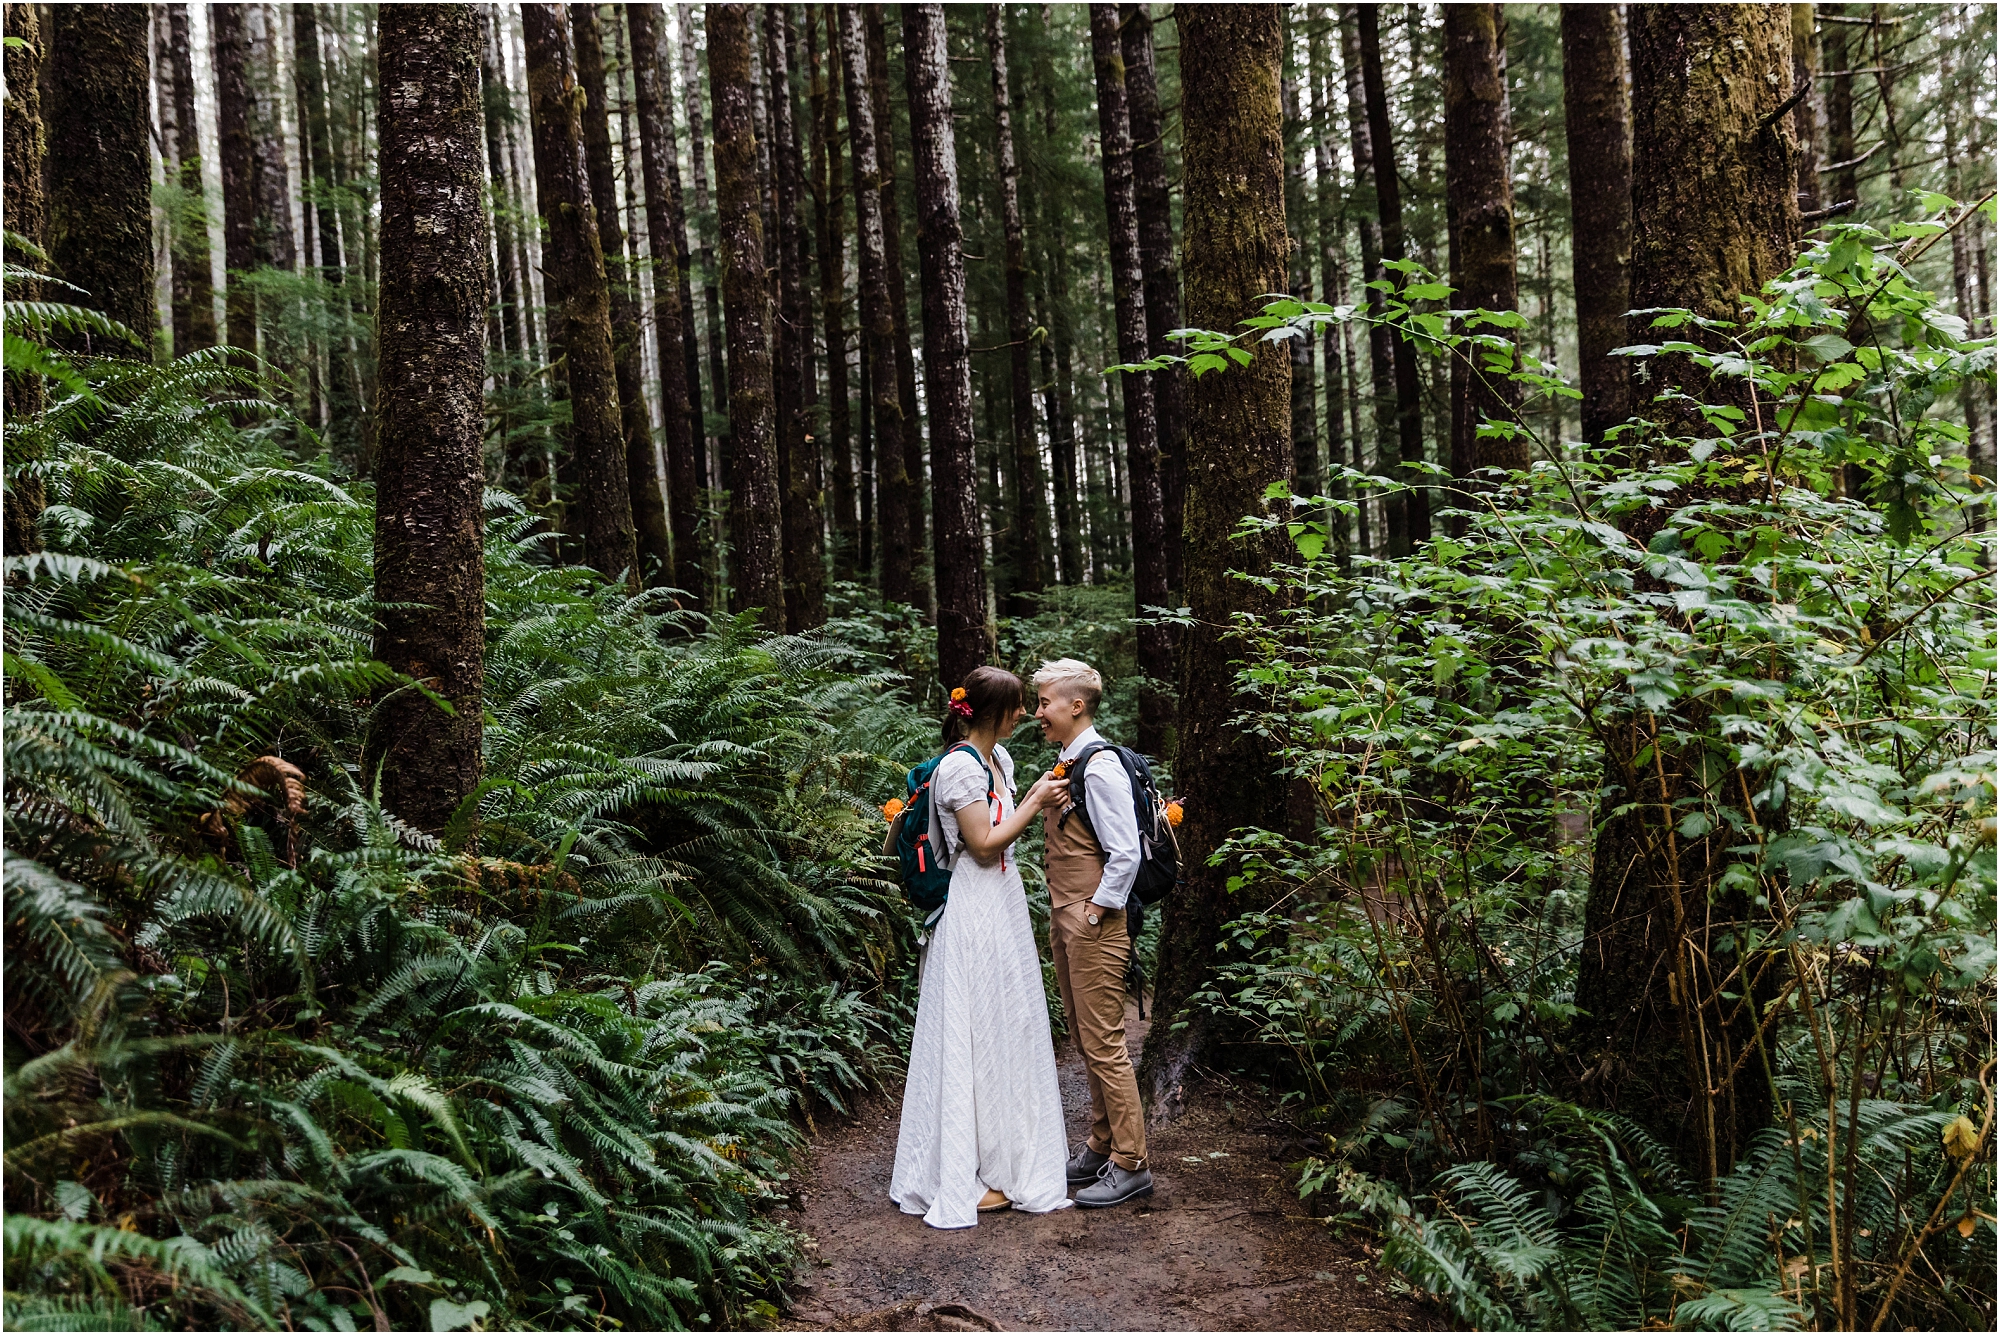 A wedding couple, stands among the tall spruce trees and lush ferns on the trail to their waterfall elopement near the Oregon Coast. | Erica Swantek Photography